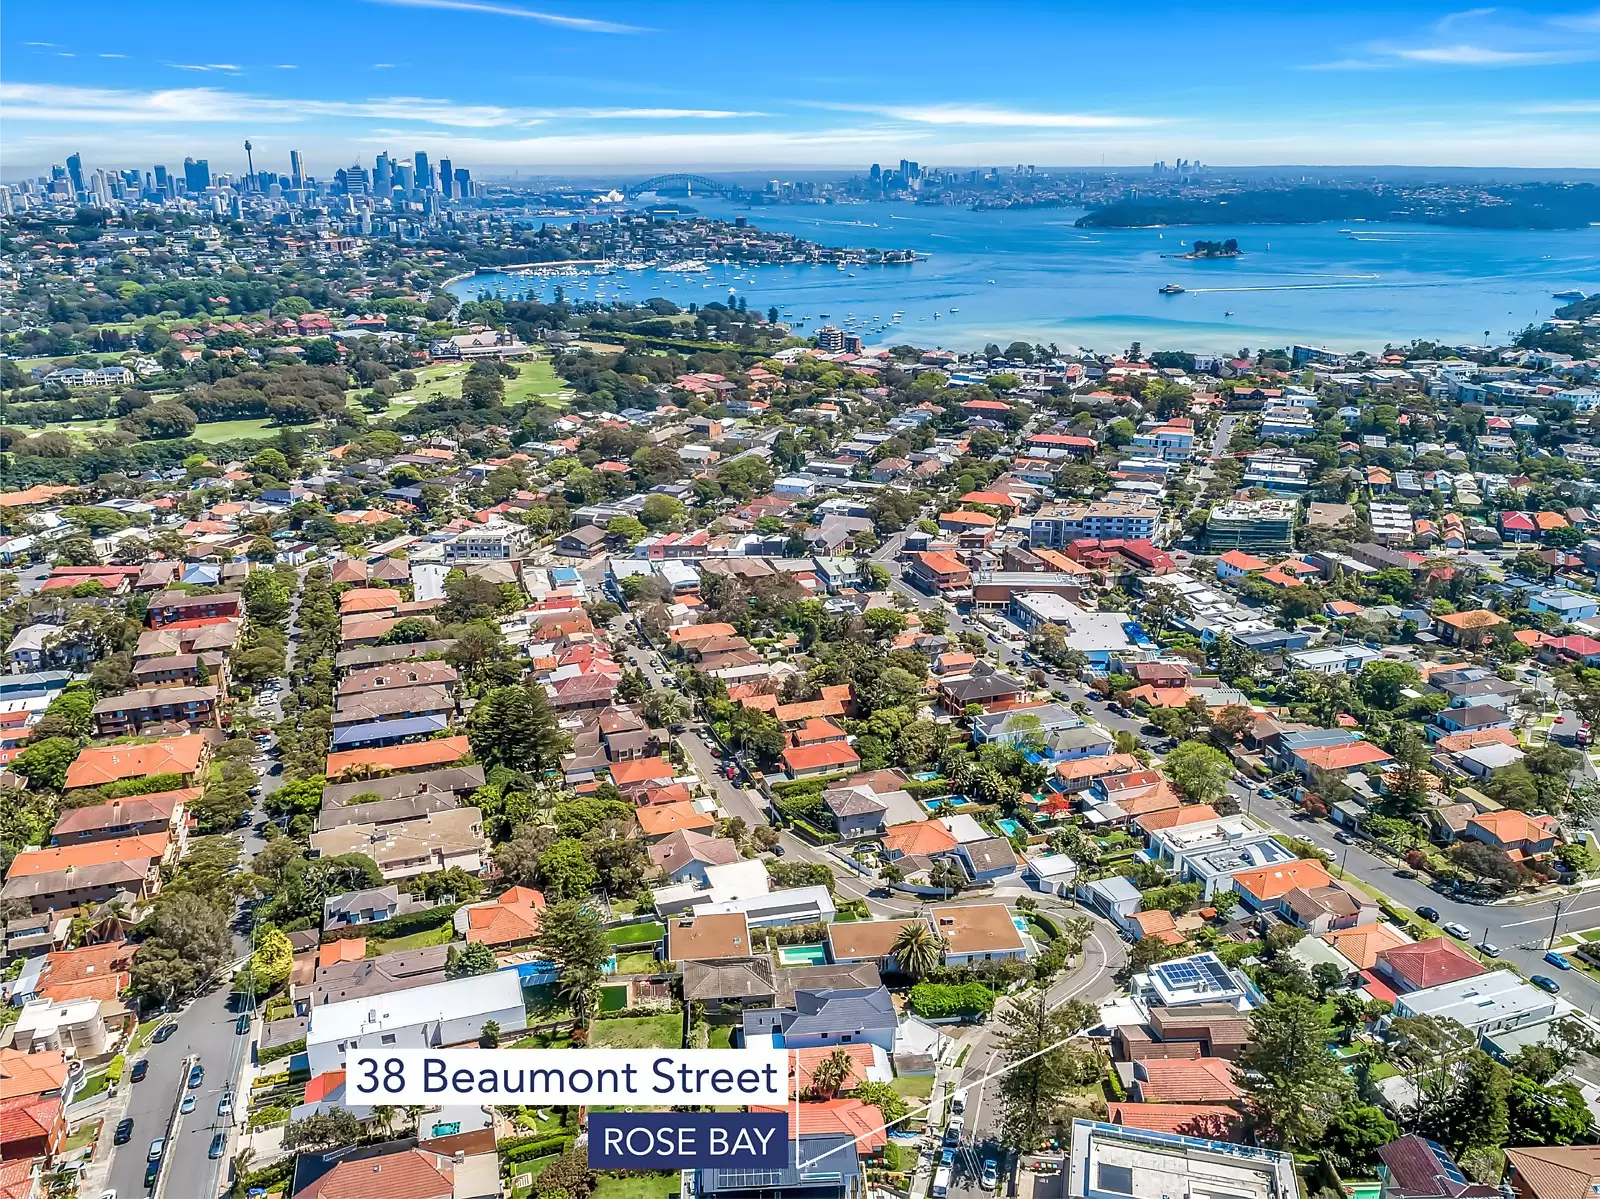 Photo #17: 38 Beaumont Street, Rose Bay - Sold by Sydney Sotheby's International Realty